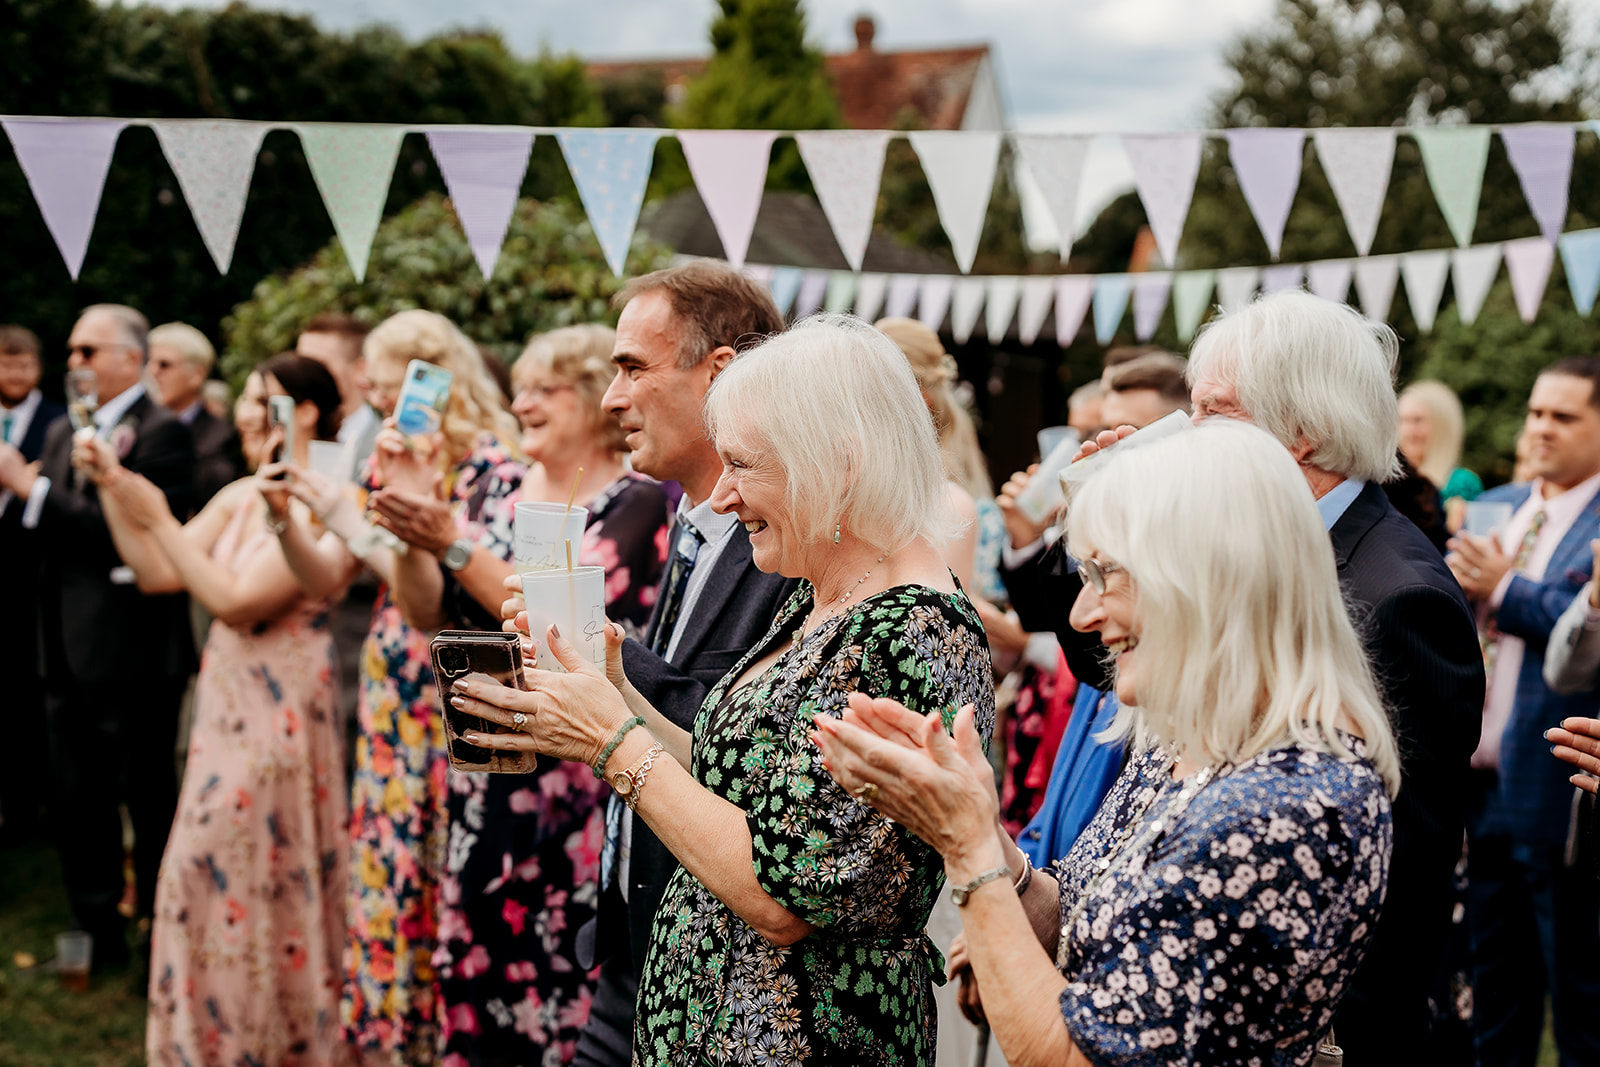 family and loved ones clapping after a speech captured by a Romsey wedding photographer